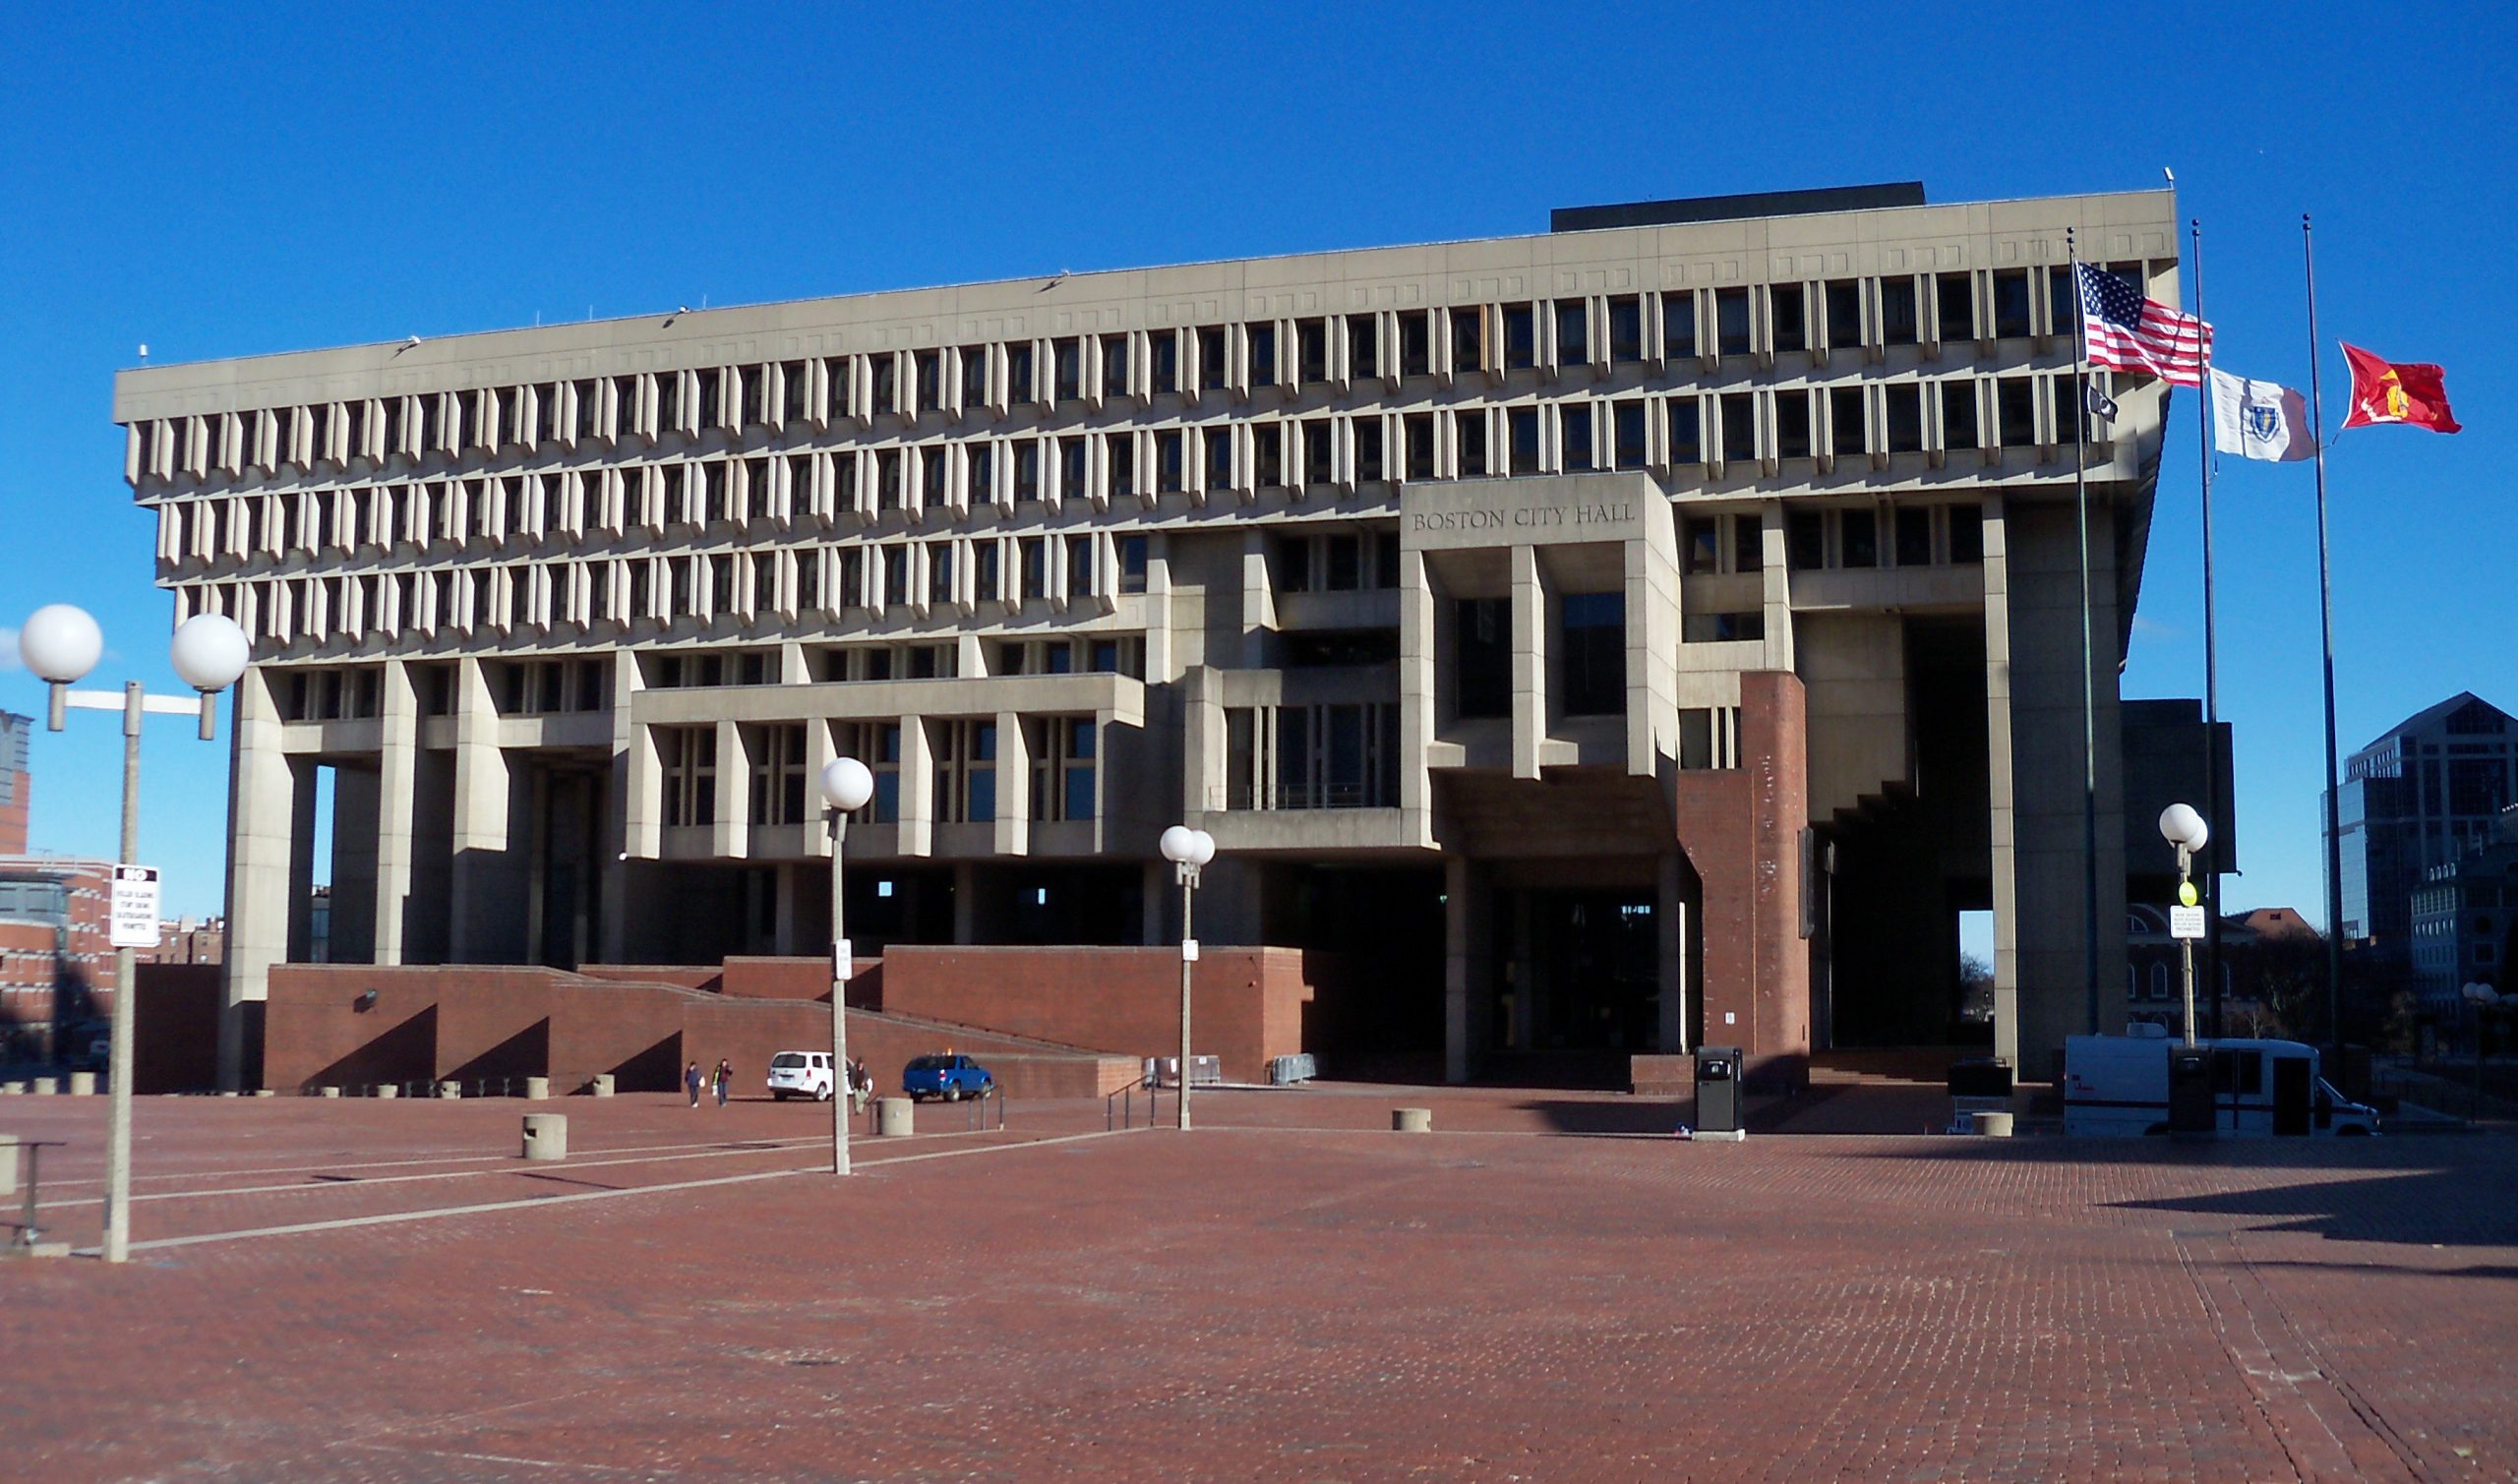 large concrete brutalist building with empty plaza and three flags in front